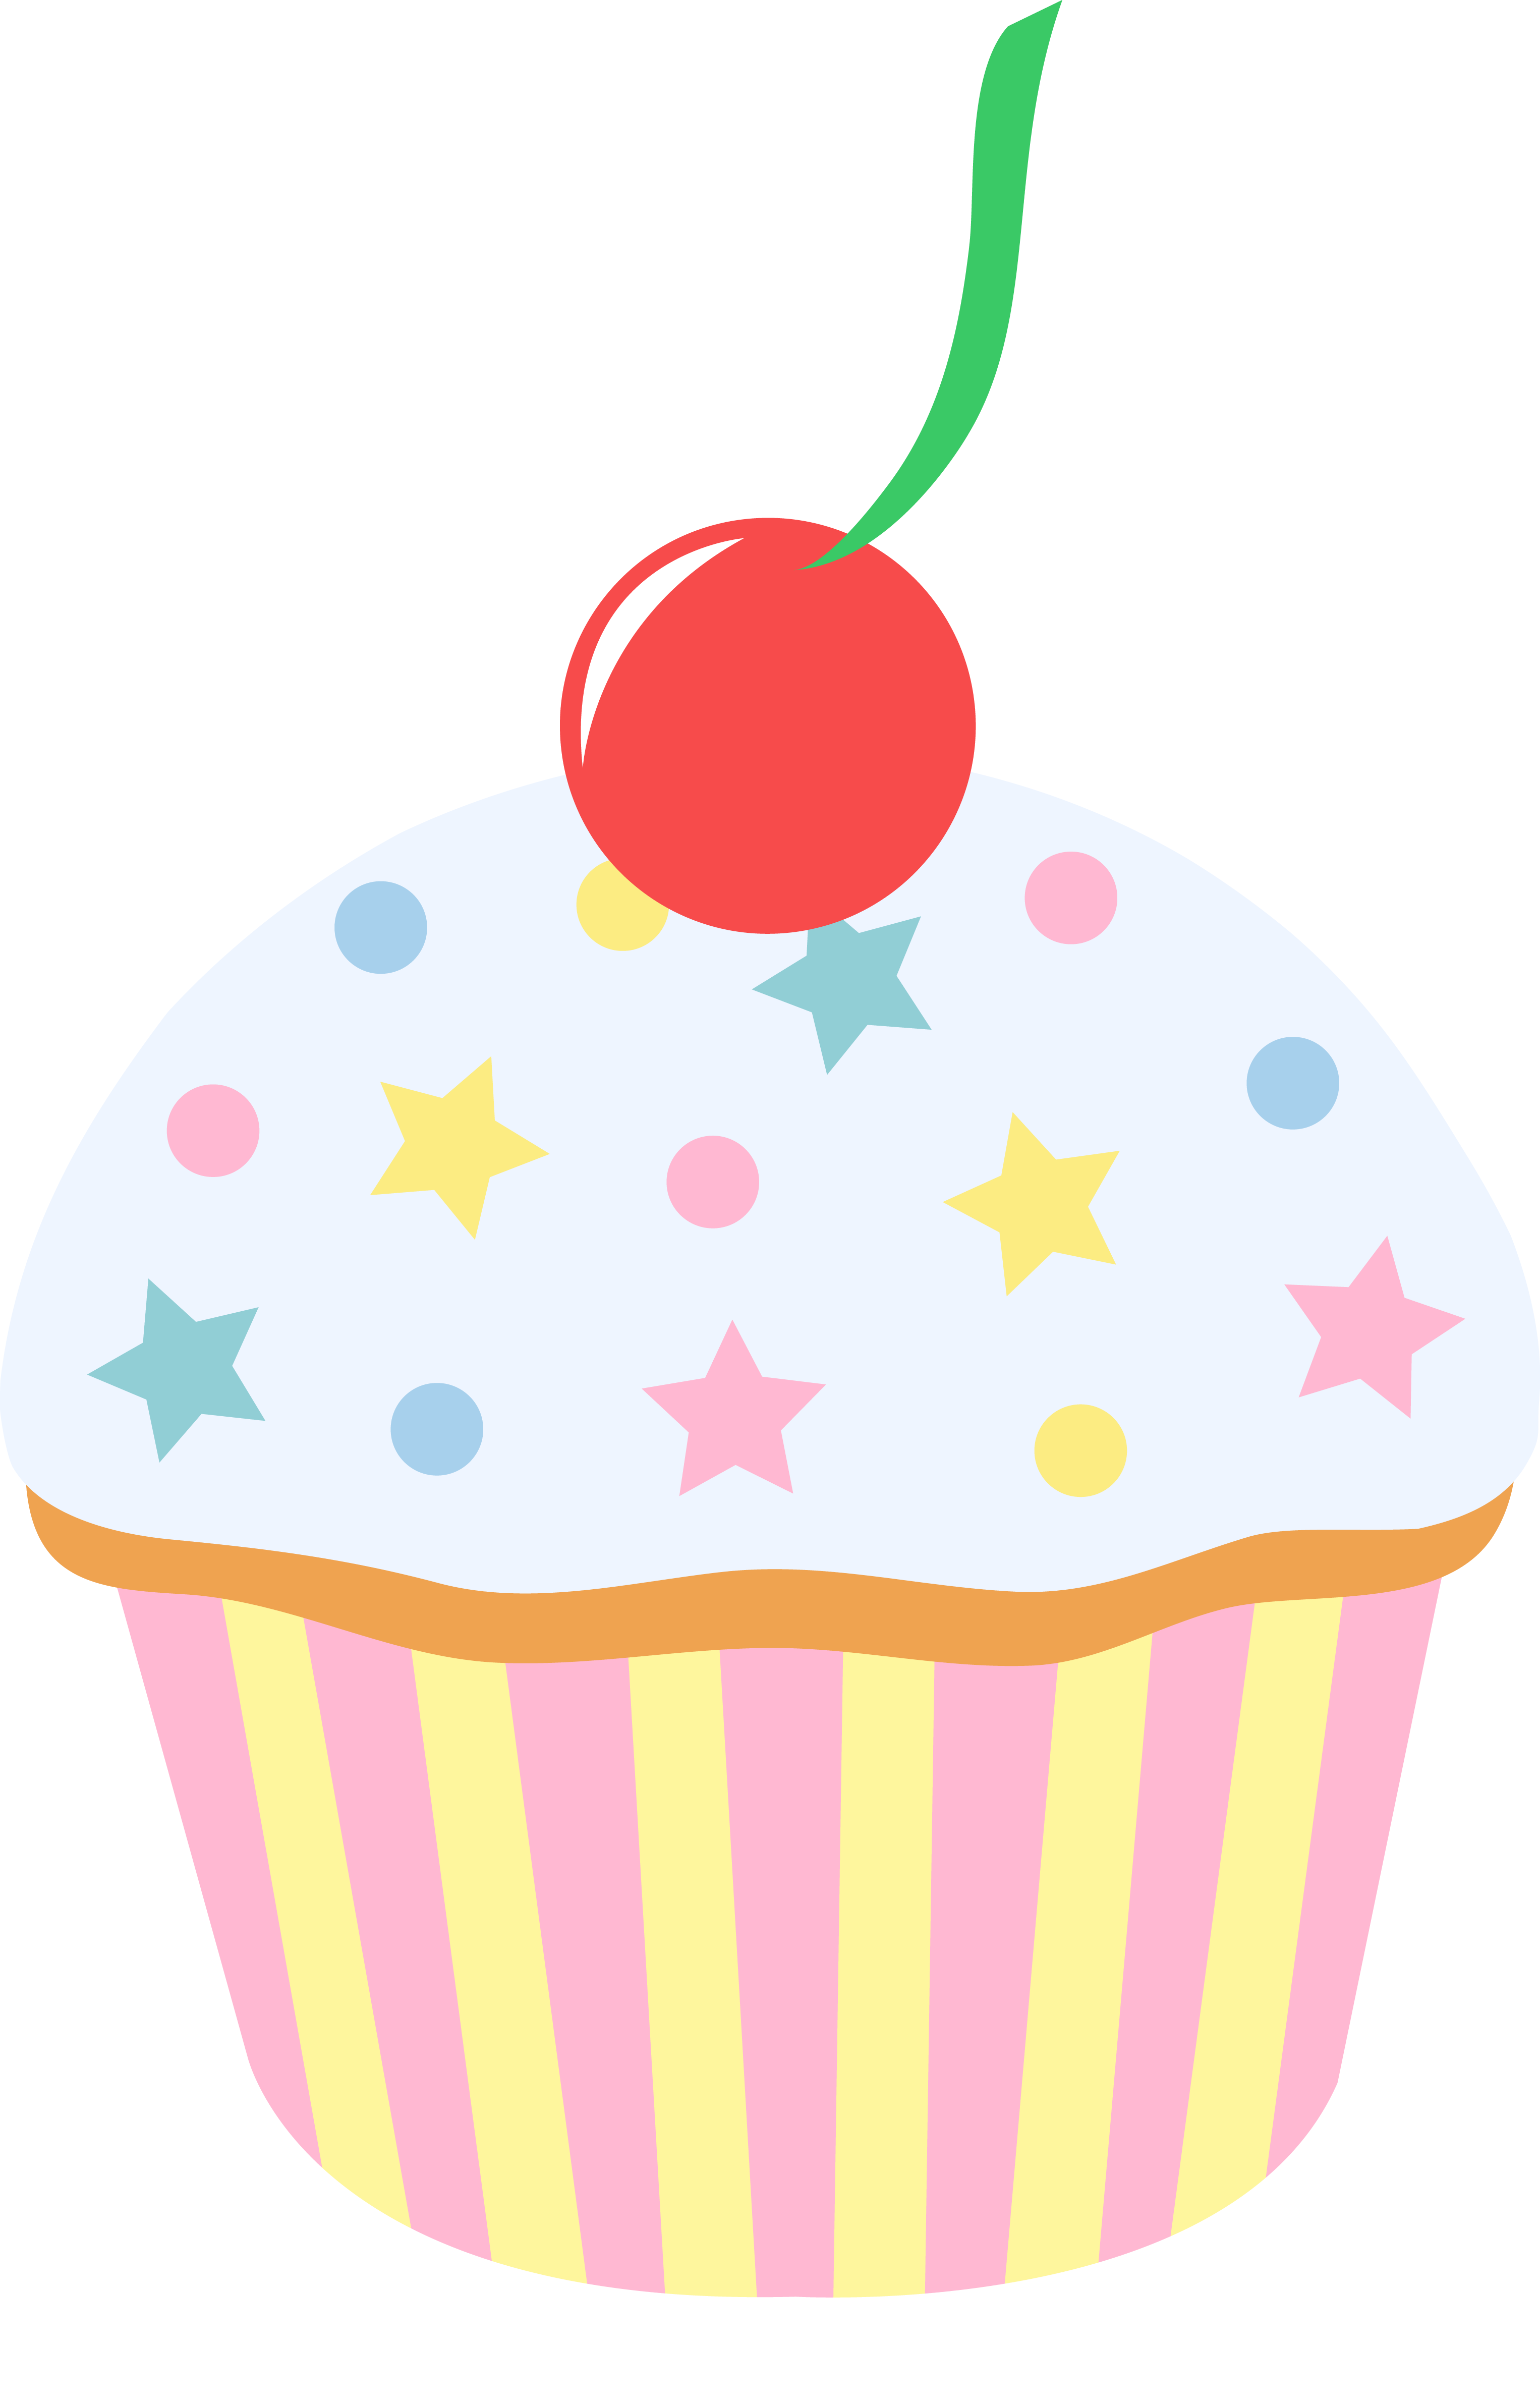 cupcake clipart free download - photo #7